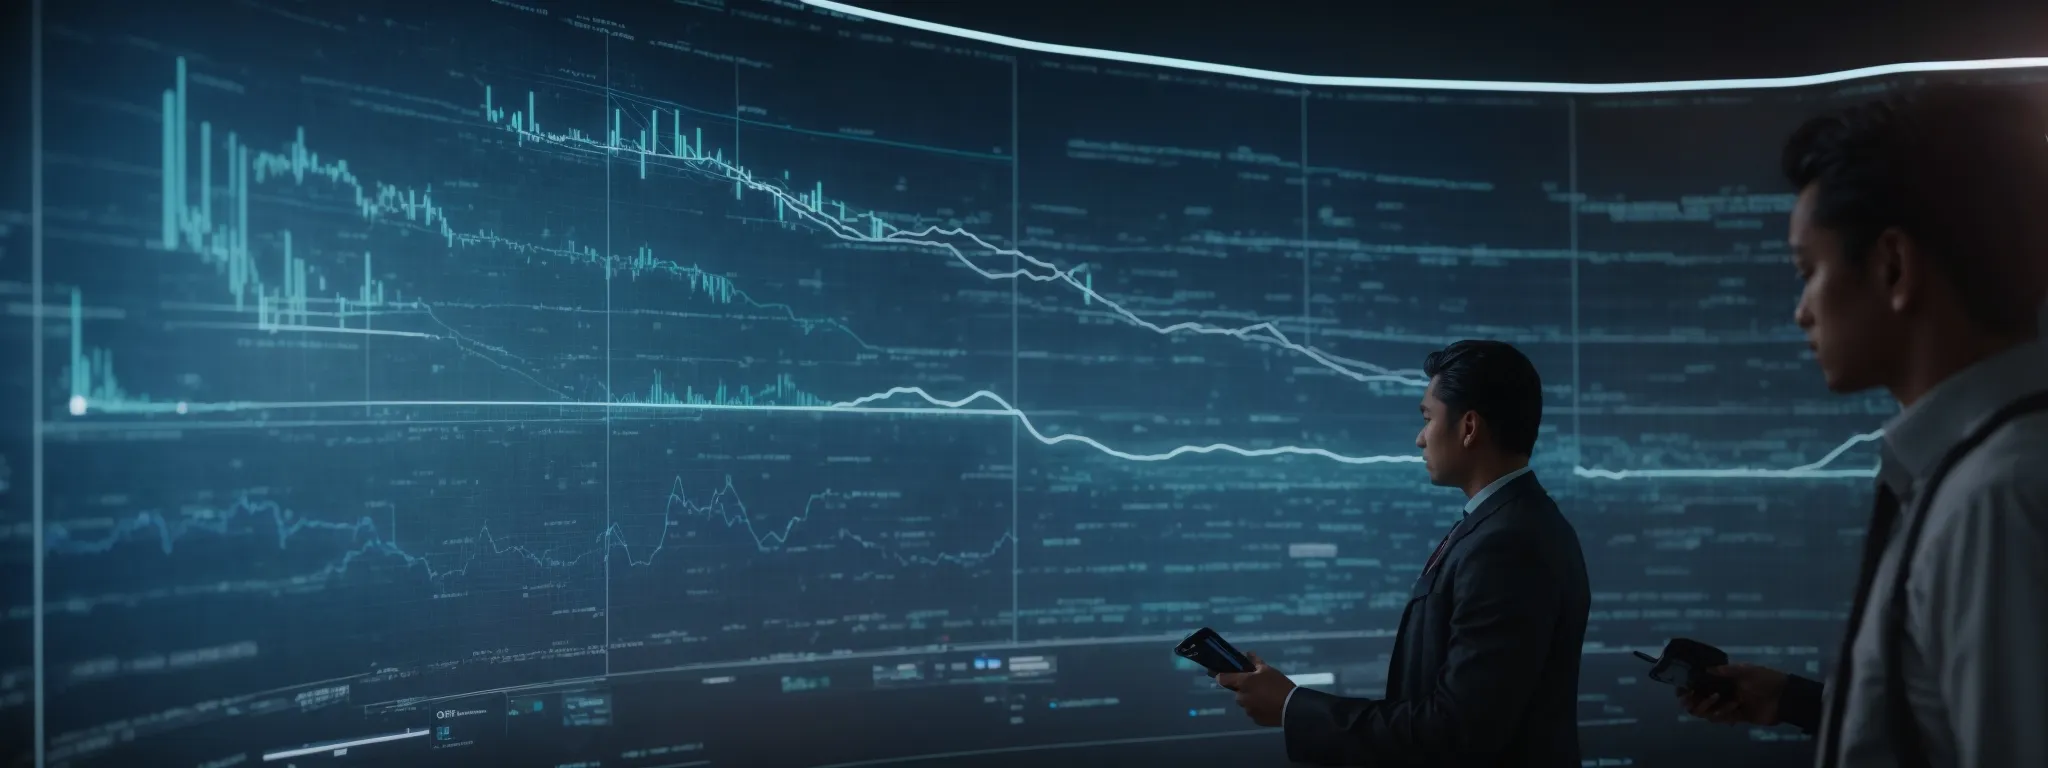 a person interacts with a futuristic interface showing charts and seo data analytics on a large screen, symbolizing the streamlining of seo tasks through innovative project management tools.